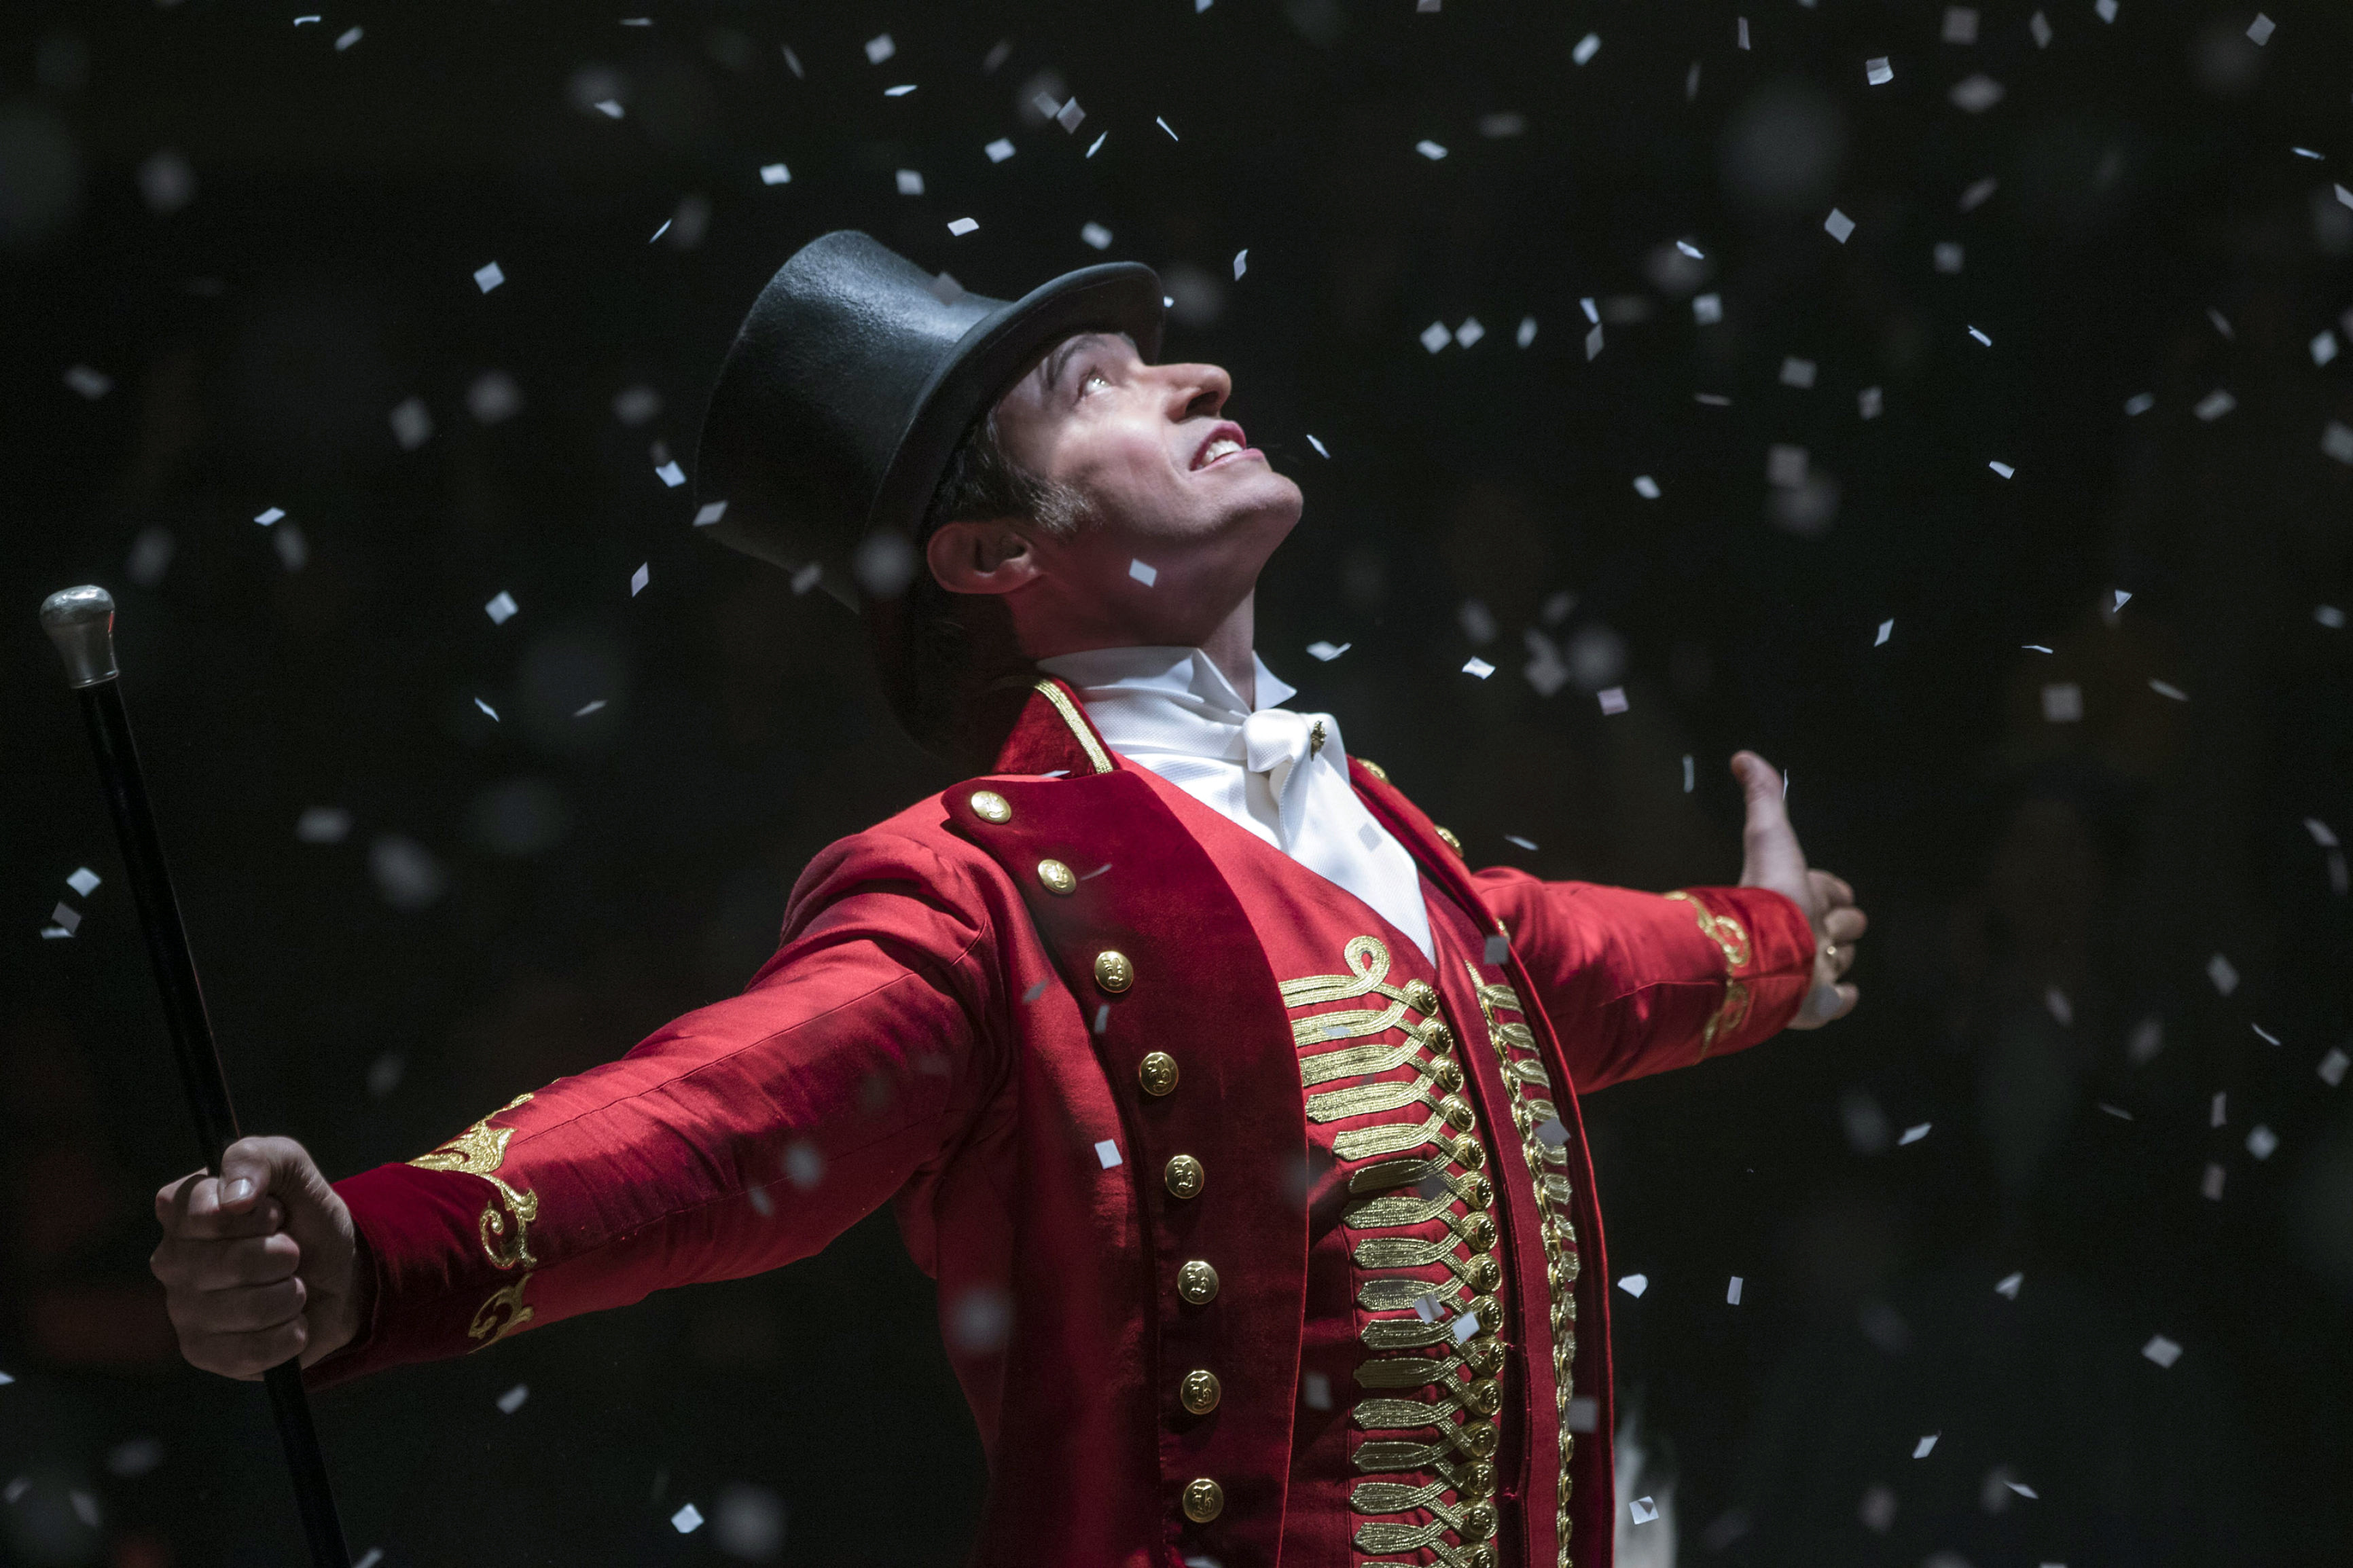 Editorial use only. No book cover usage.
Mandatory Credit: Photo by Ntavernise/20thcentury Fox/Kobal/REX/Shutterstock (9308130c)
Hugh Jackman
"The Greatest Showman" Film - 2017